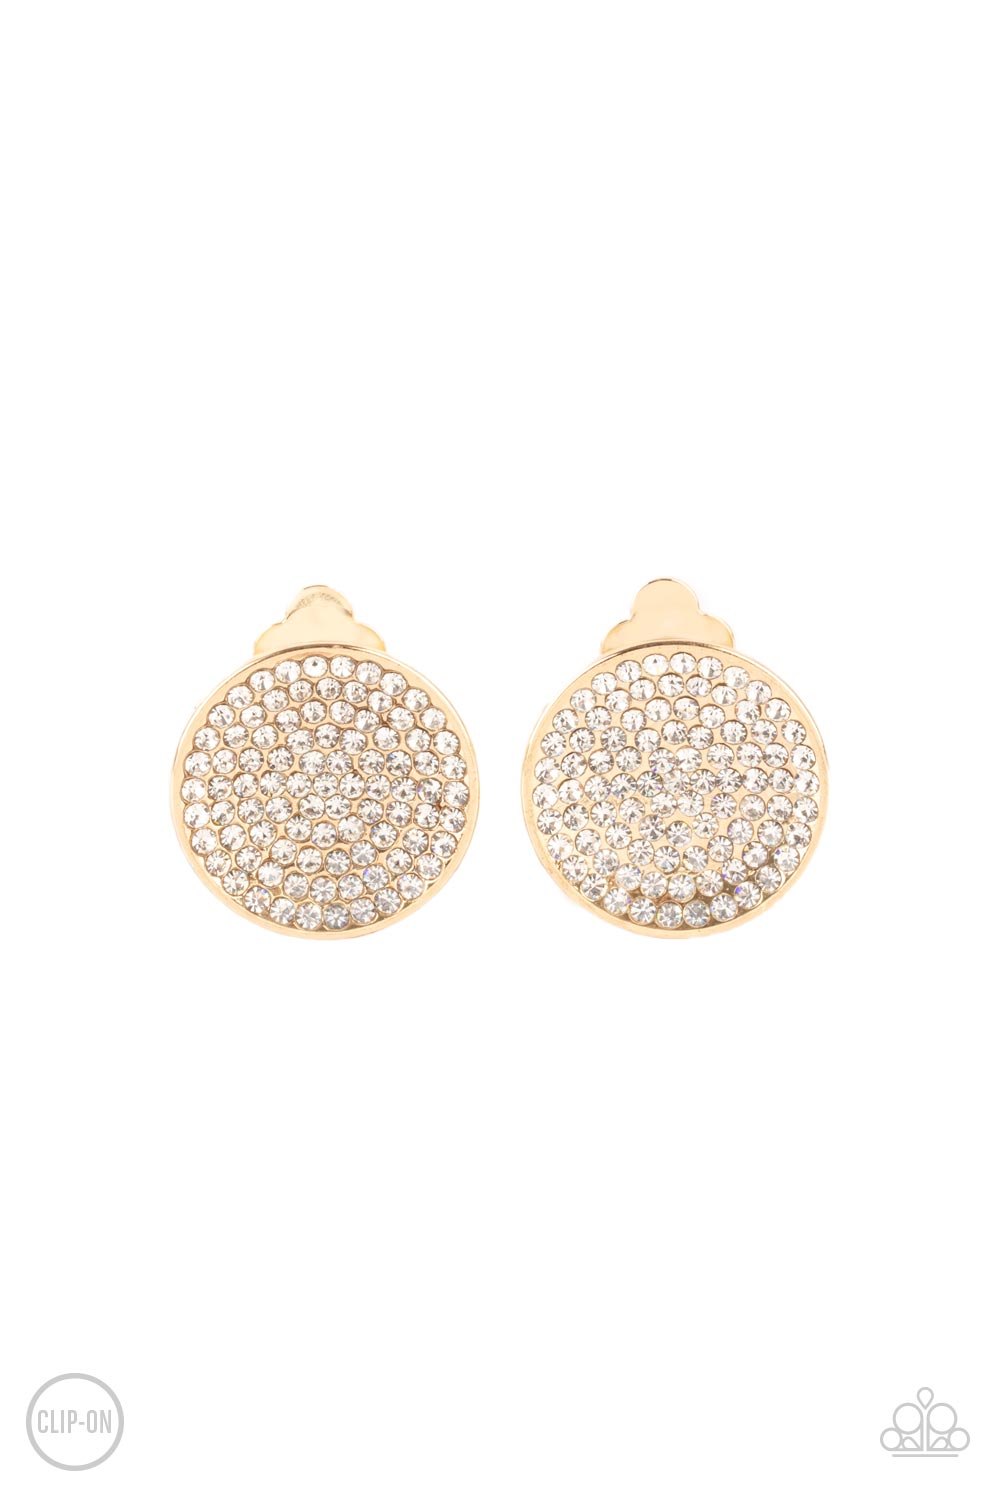 Drama on Demand Gold Clip-On Earring - Paparazzi Accessories  Sparkling with brilliance, a concave shiny gold disc encompasses radiating rows of shimmering white rhinestones creating a striking impact. Earring attaches to a standard clip-on fitting.  Sold as one pair of clip-on earrings.